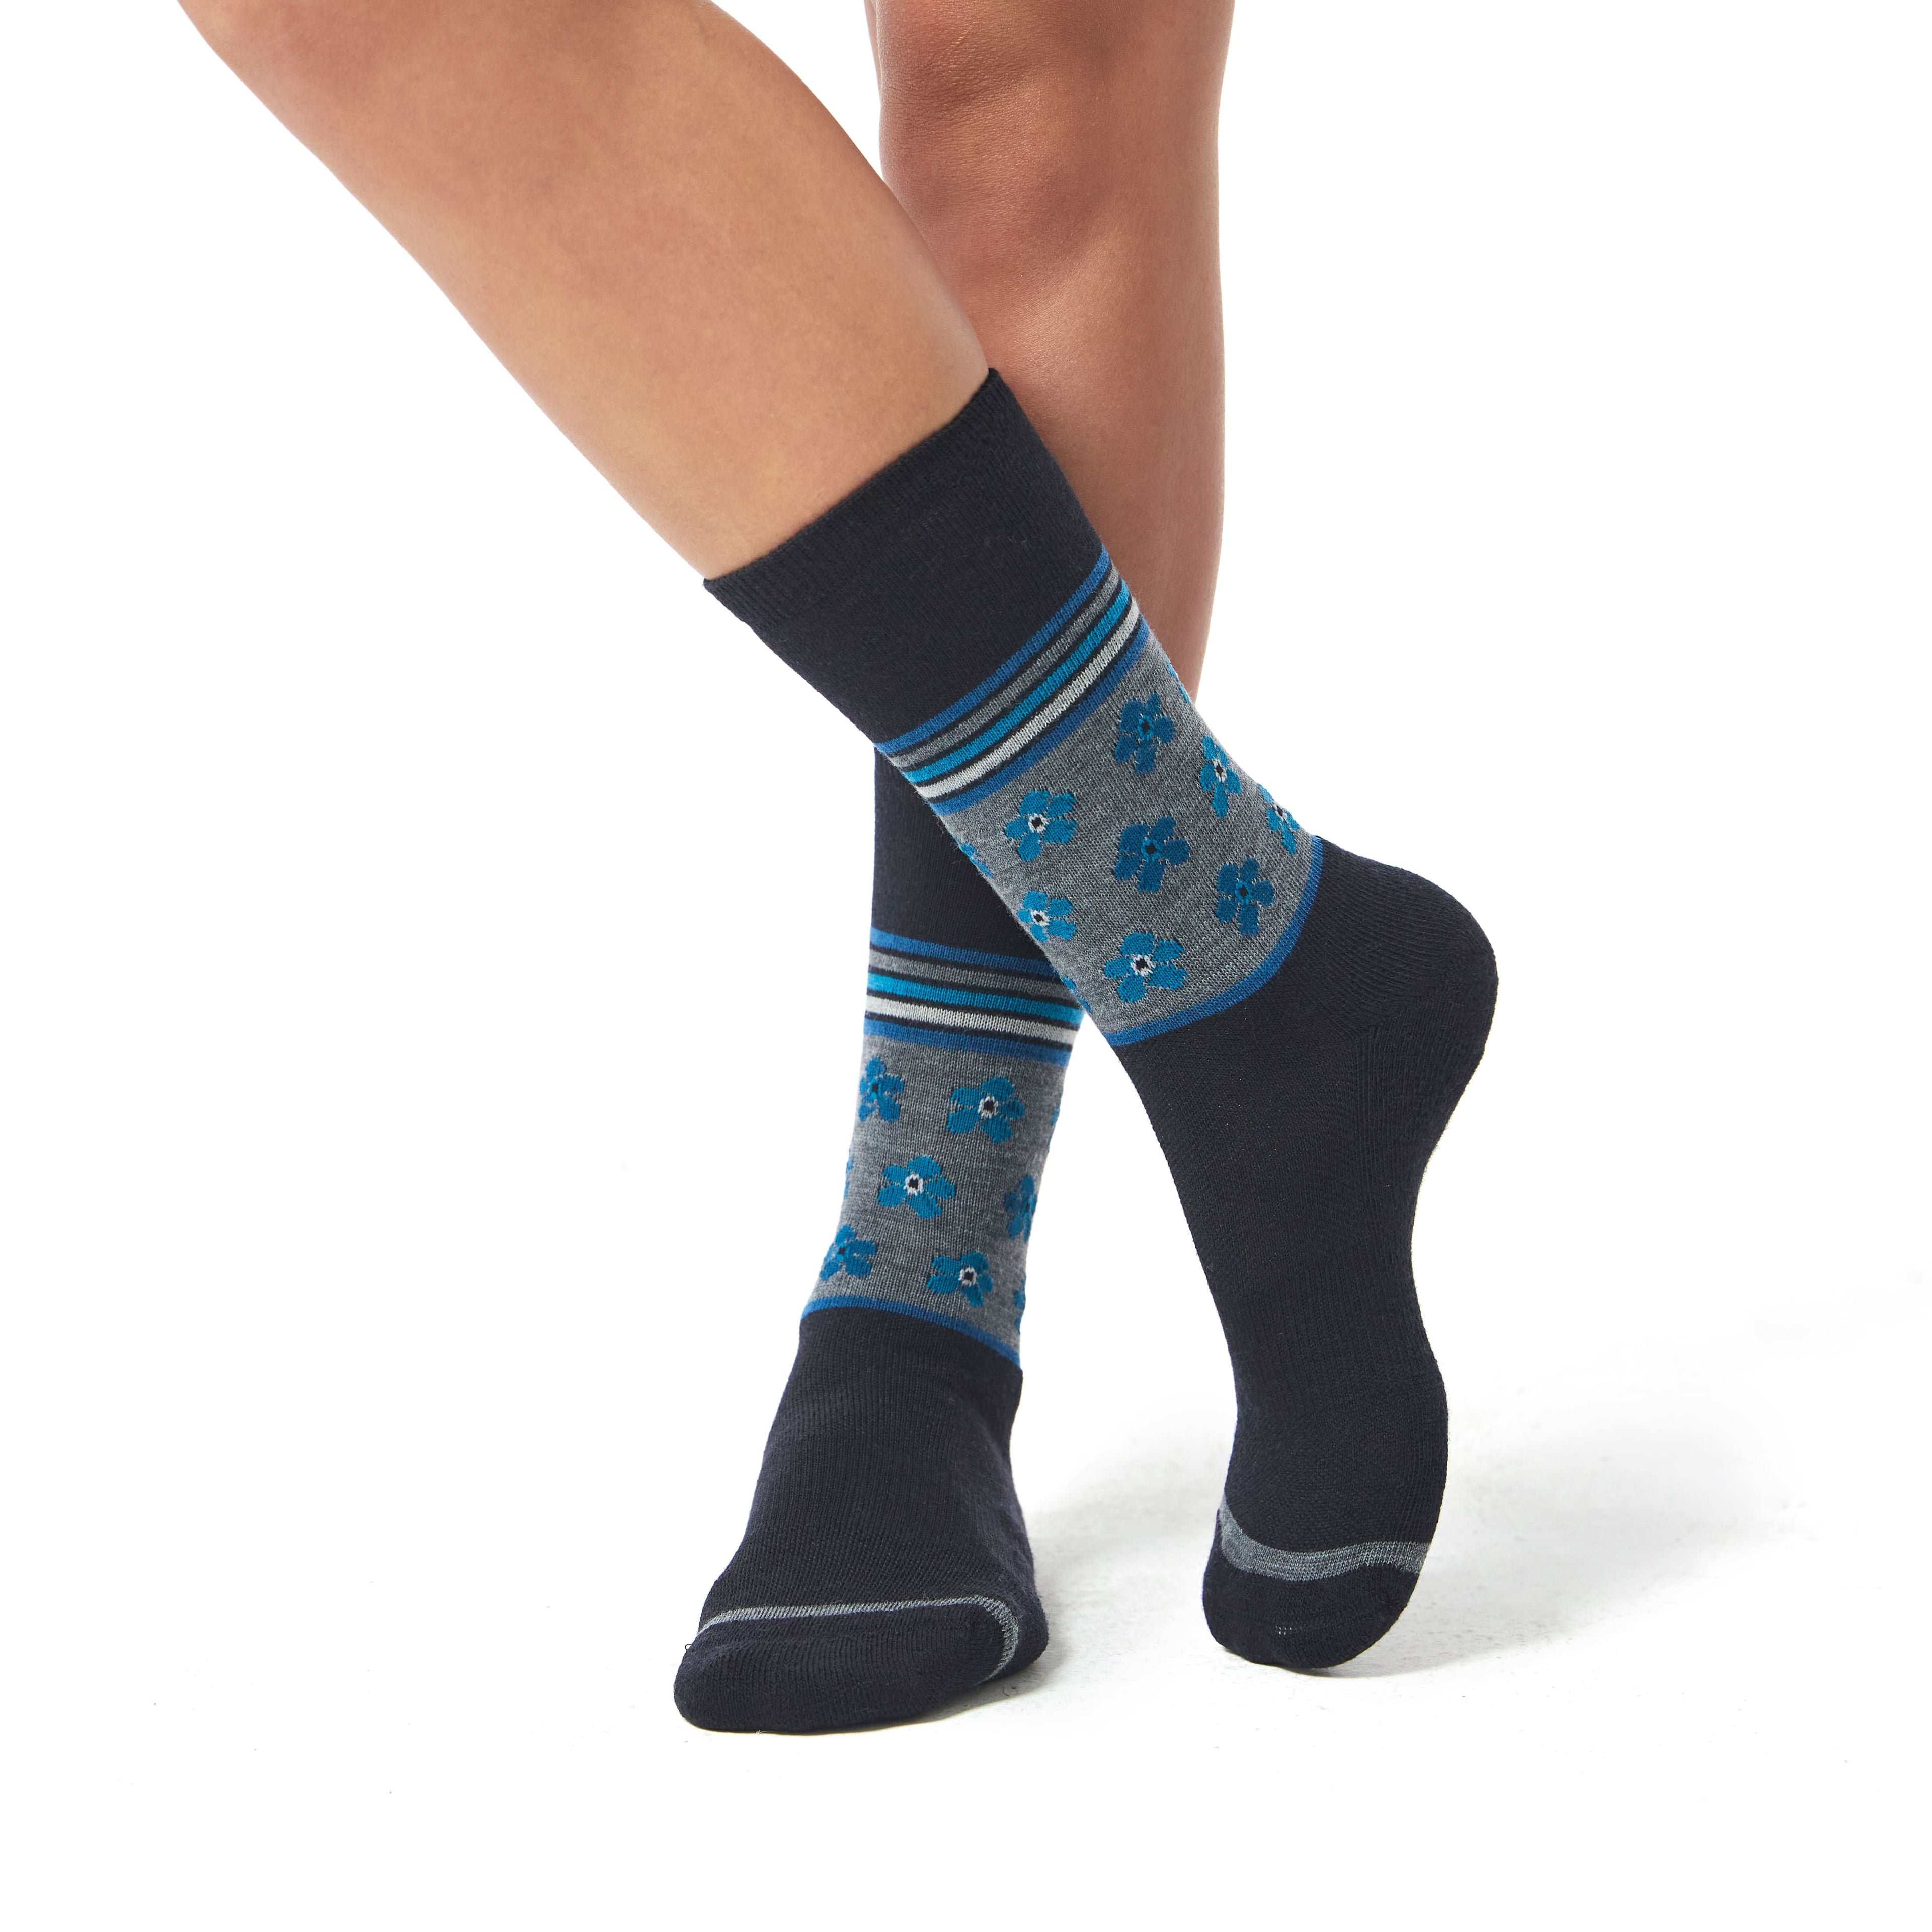 Designed for extreme weather and outdoor activities, our wool socks will keep your feet warm and comfortable in any condition.-4